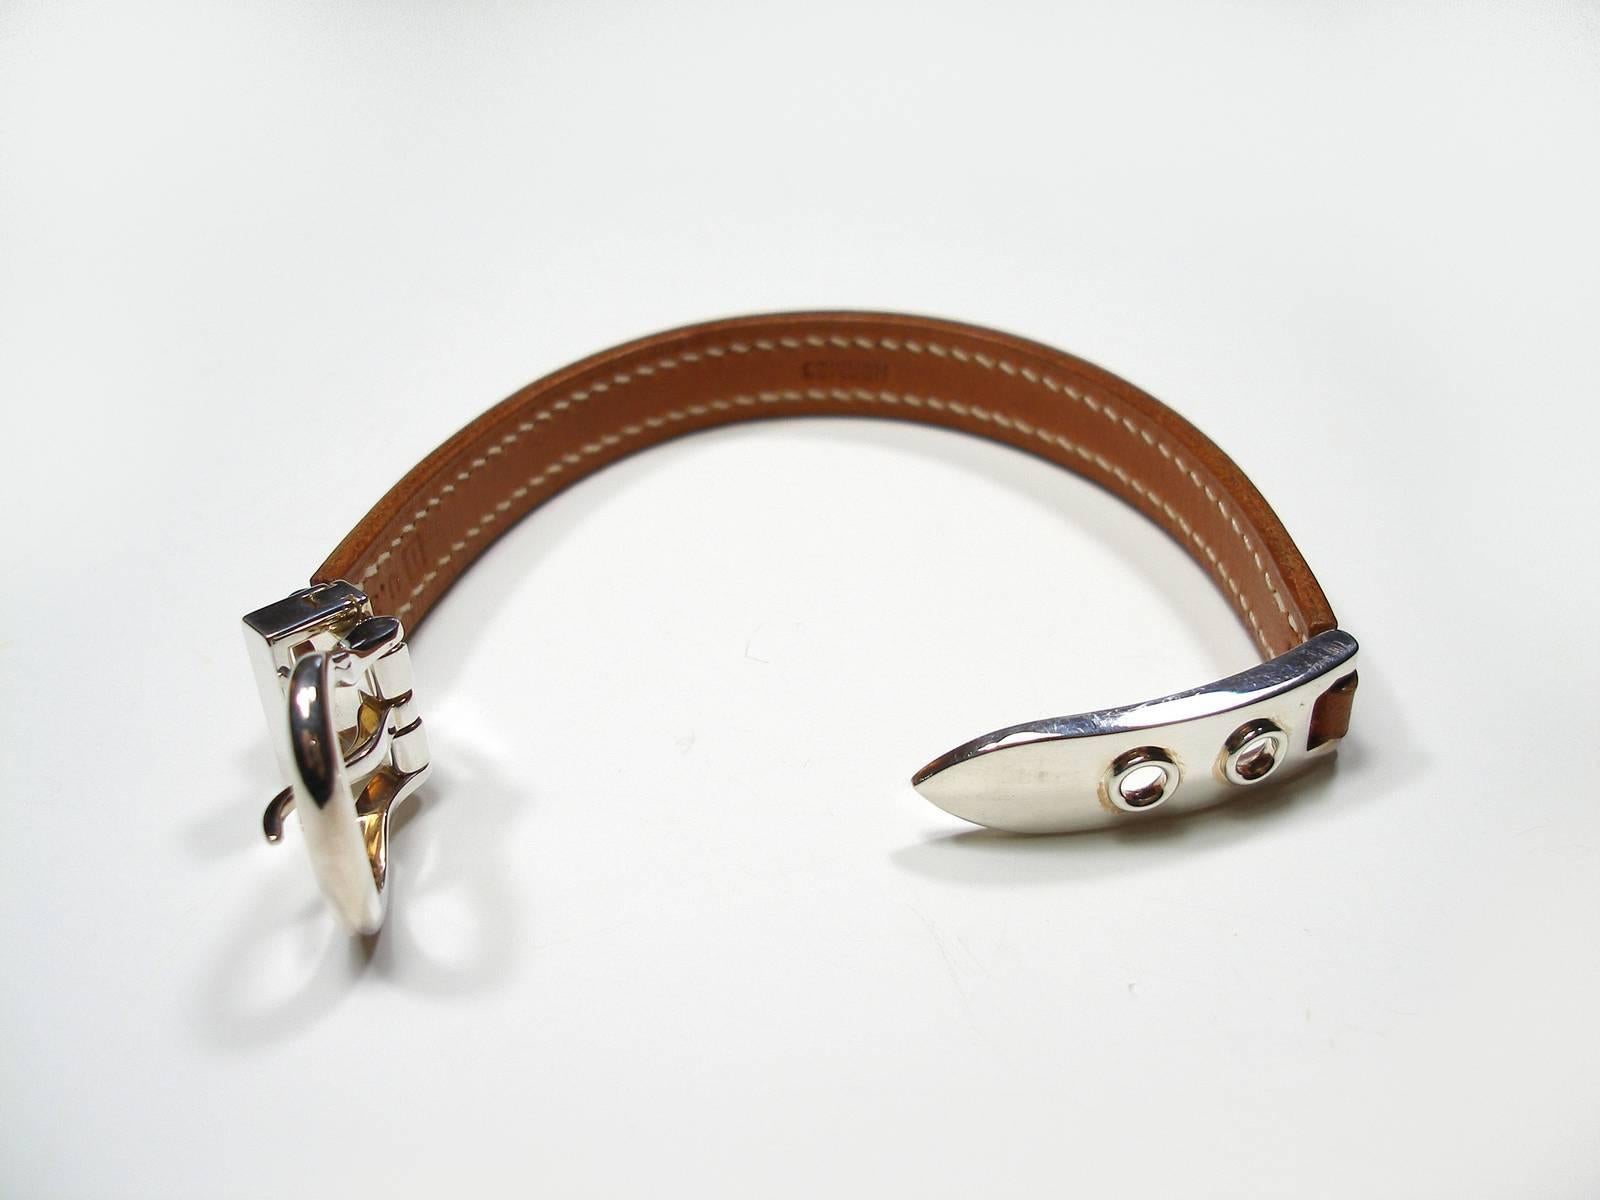 Circa's 2005 Hermès Bracelet Boucle Sellier Silver 925 &Barenia Leather / L Size In Excellent Condition In VERGT, FR